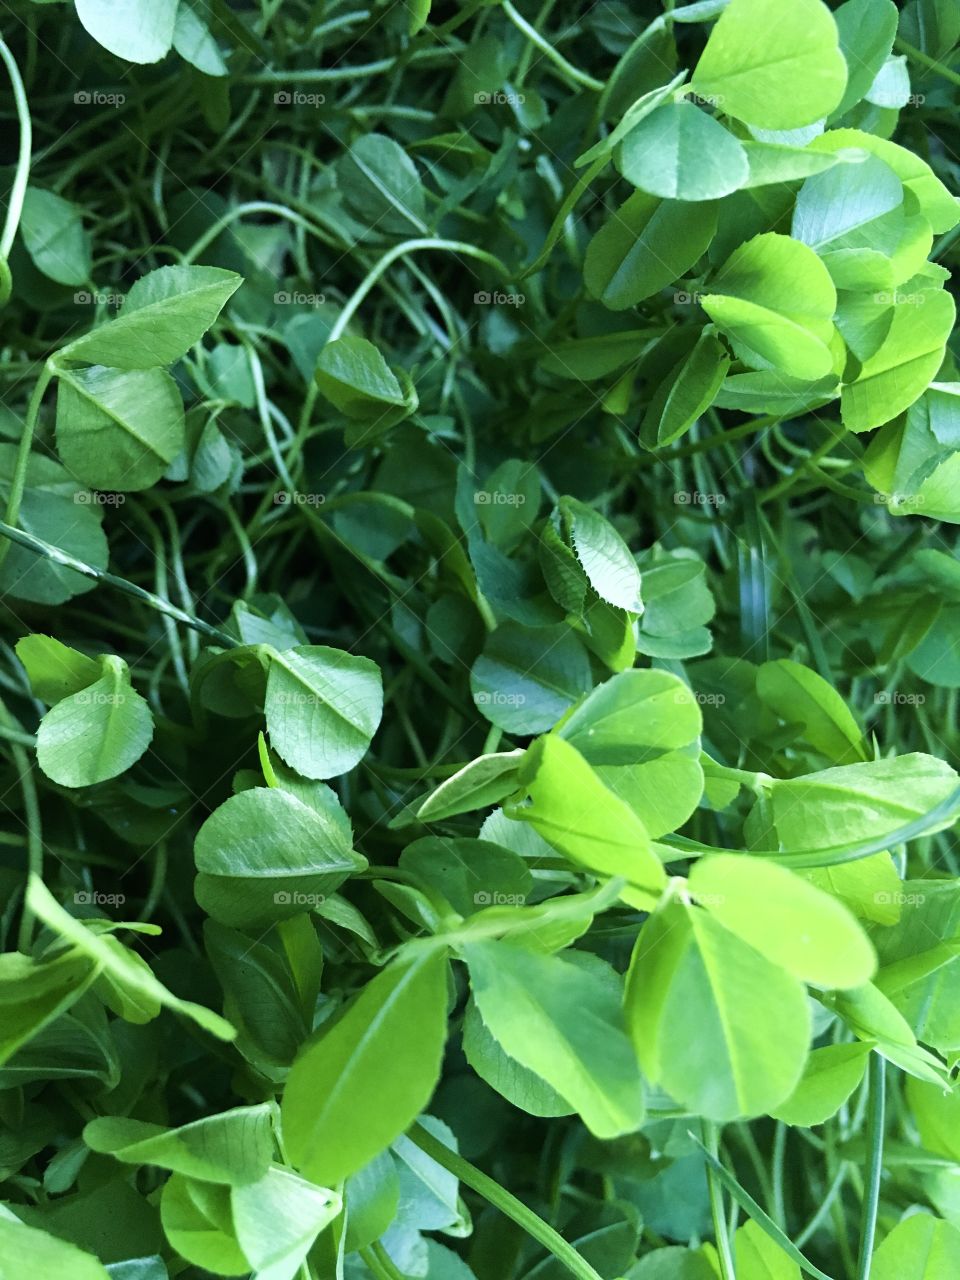 The green leaves of clover. 